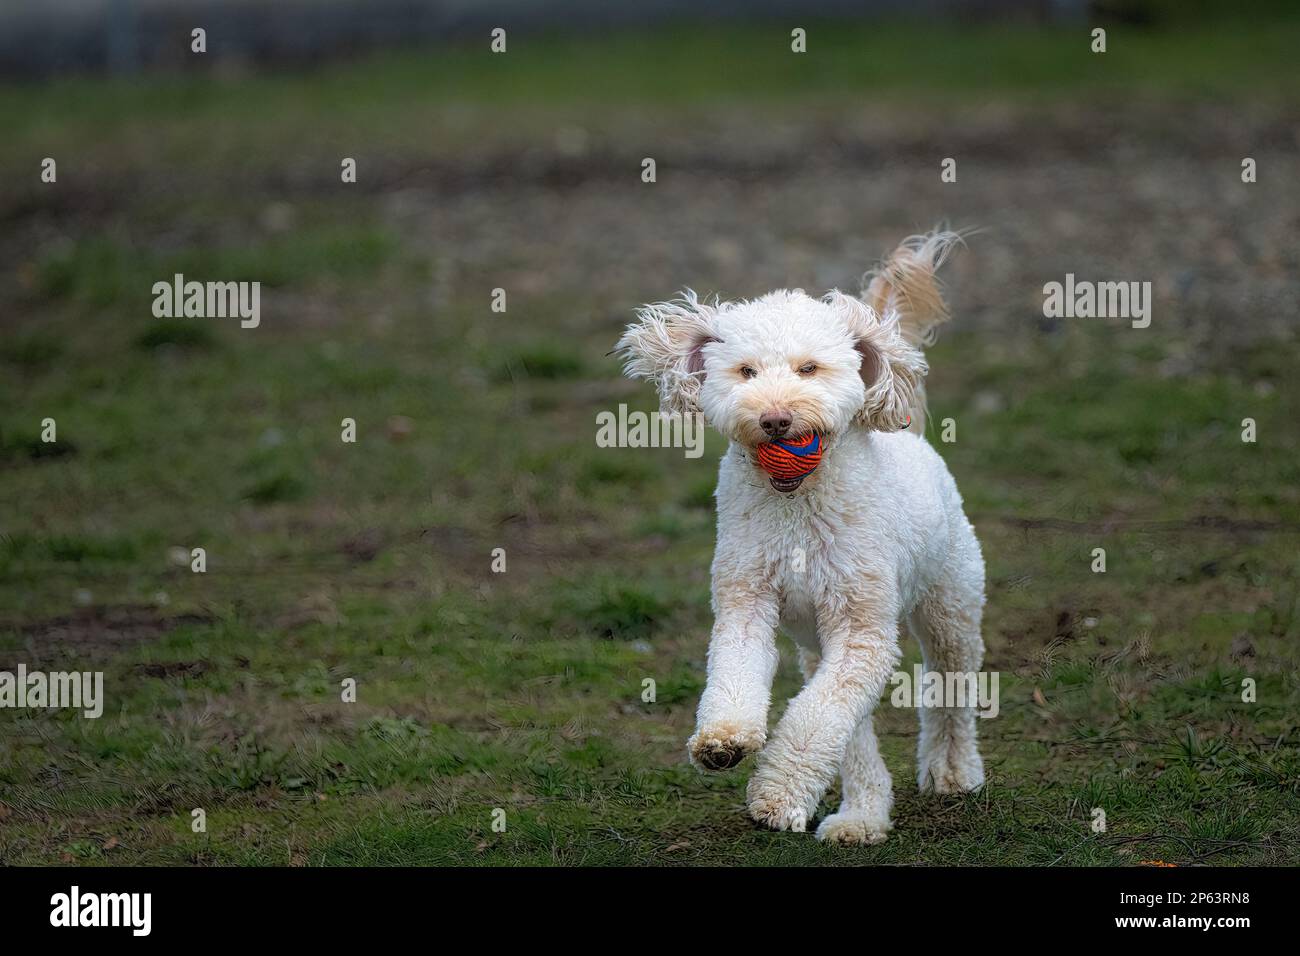 An adorable white canine running across a lush green grassy field, carrying a bright red ball in its mouth Stock Photo